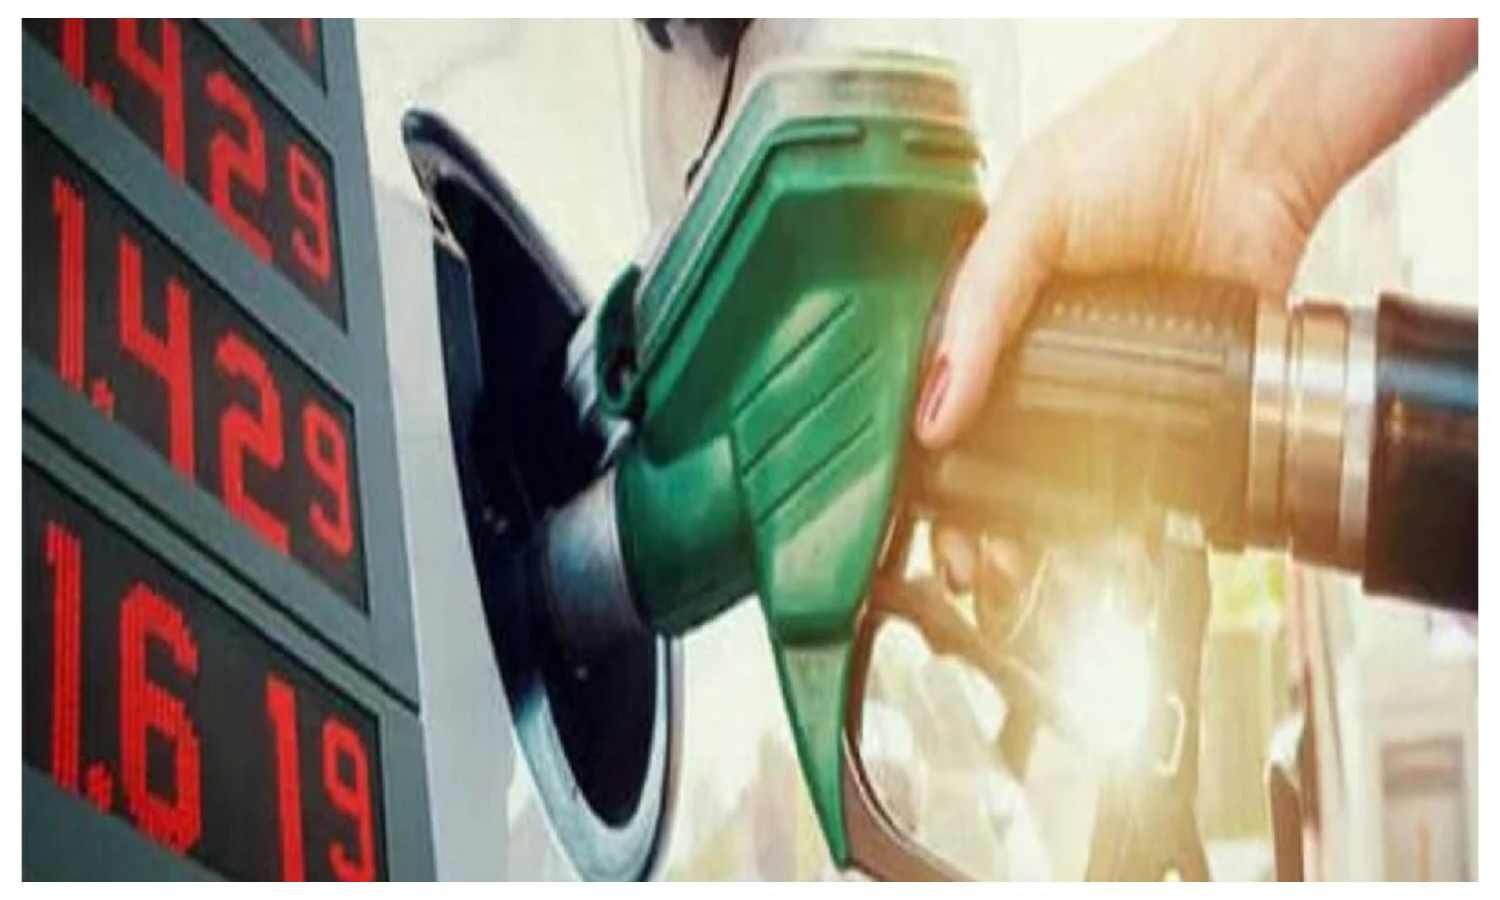 Petrol Diesel Price Today: Latest updated rates of petrol diesel released, know where the cheapest fuel is available